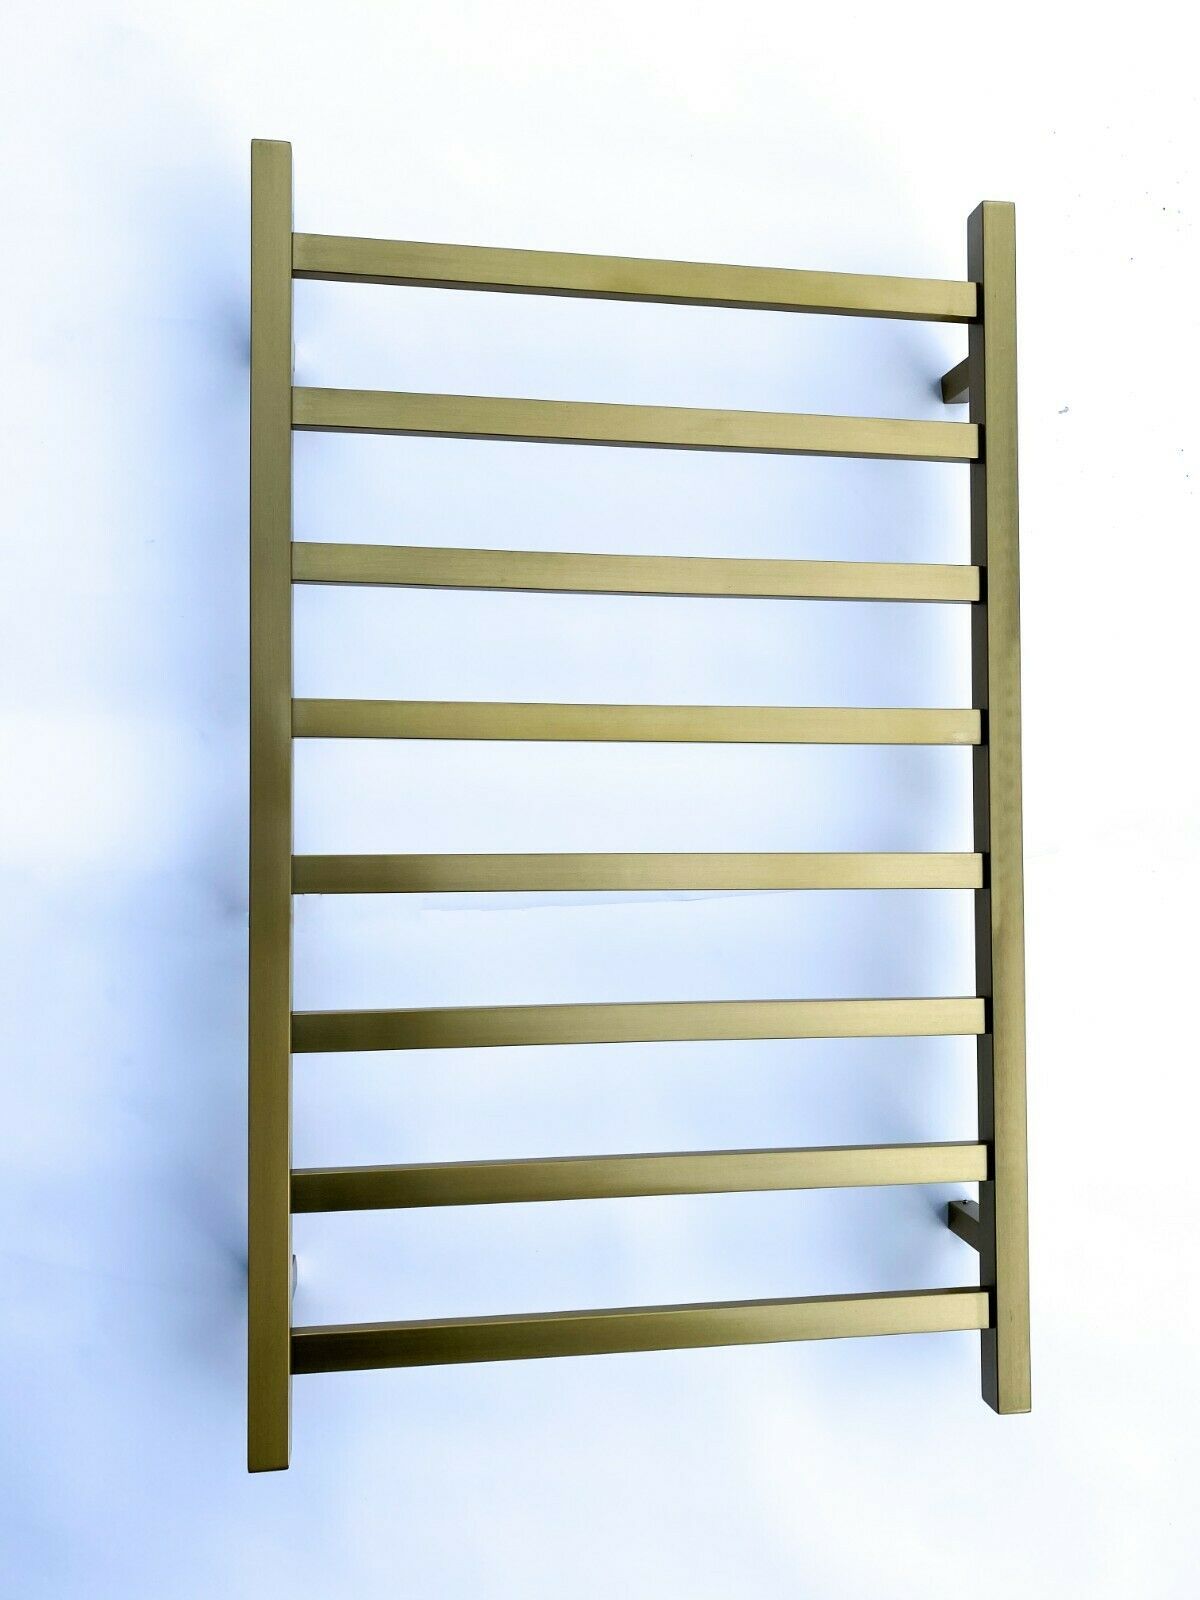 New Square Burnished Brass Gold Copper Chrome NON Heated Towel Rail rack 8 bar